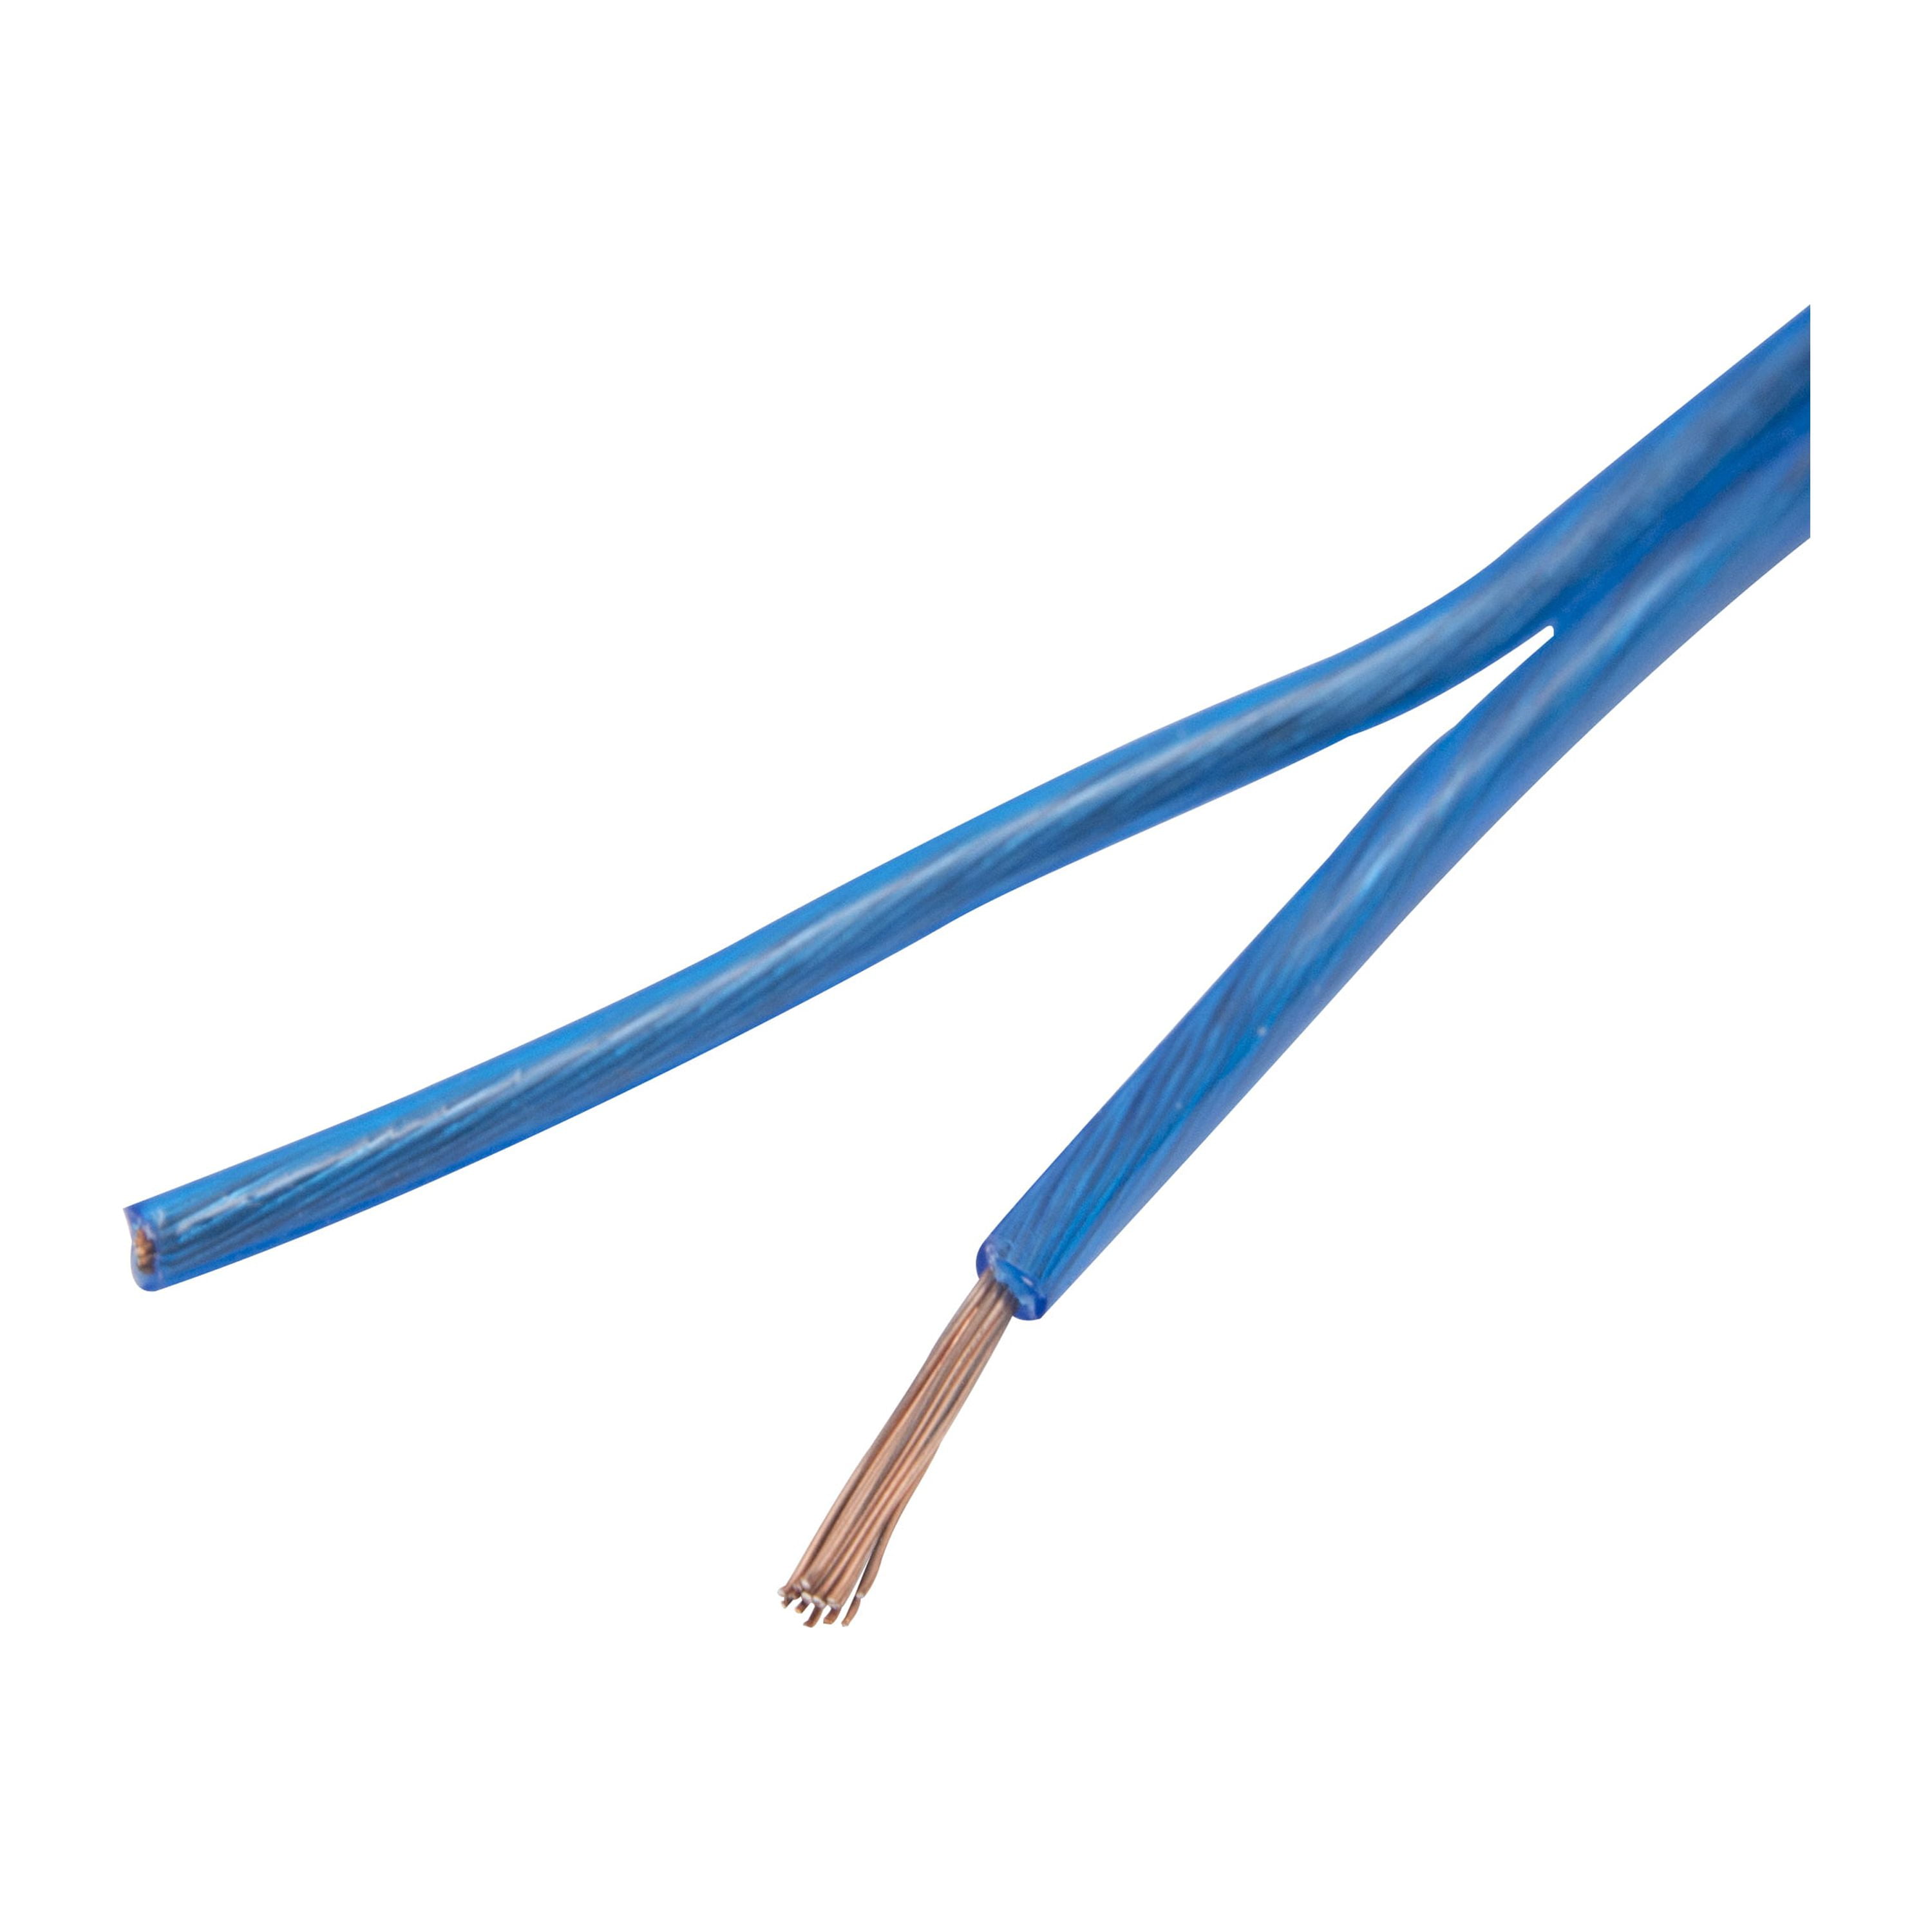  AUDIOPIPE 18 Gauge Automotive Primary Wire (50ft/Blue), Ideal  for Trailer, Speaker, and Lighting Circuits